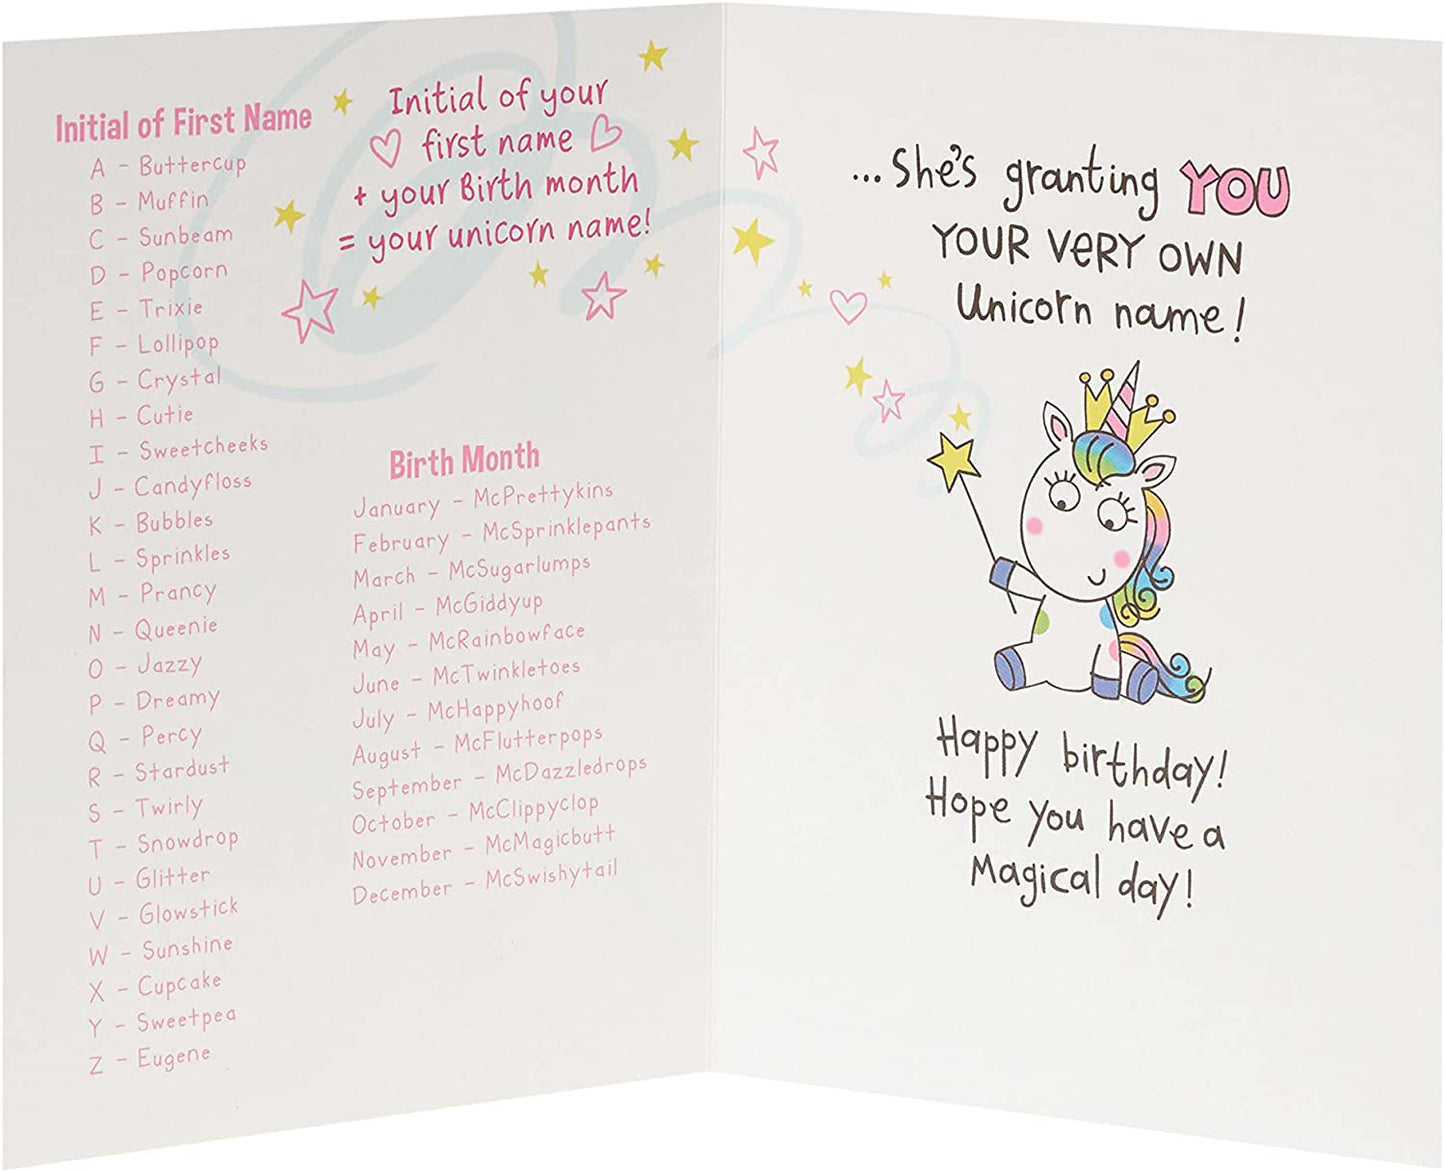 Find Your Name Unicorn Birthday Card Funny